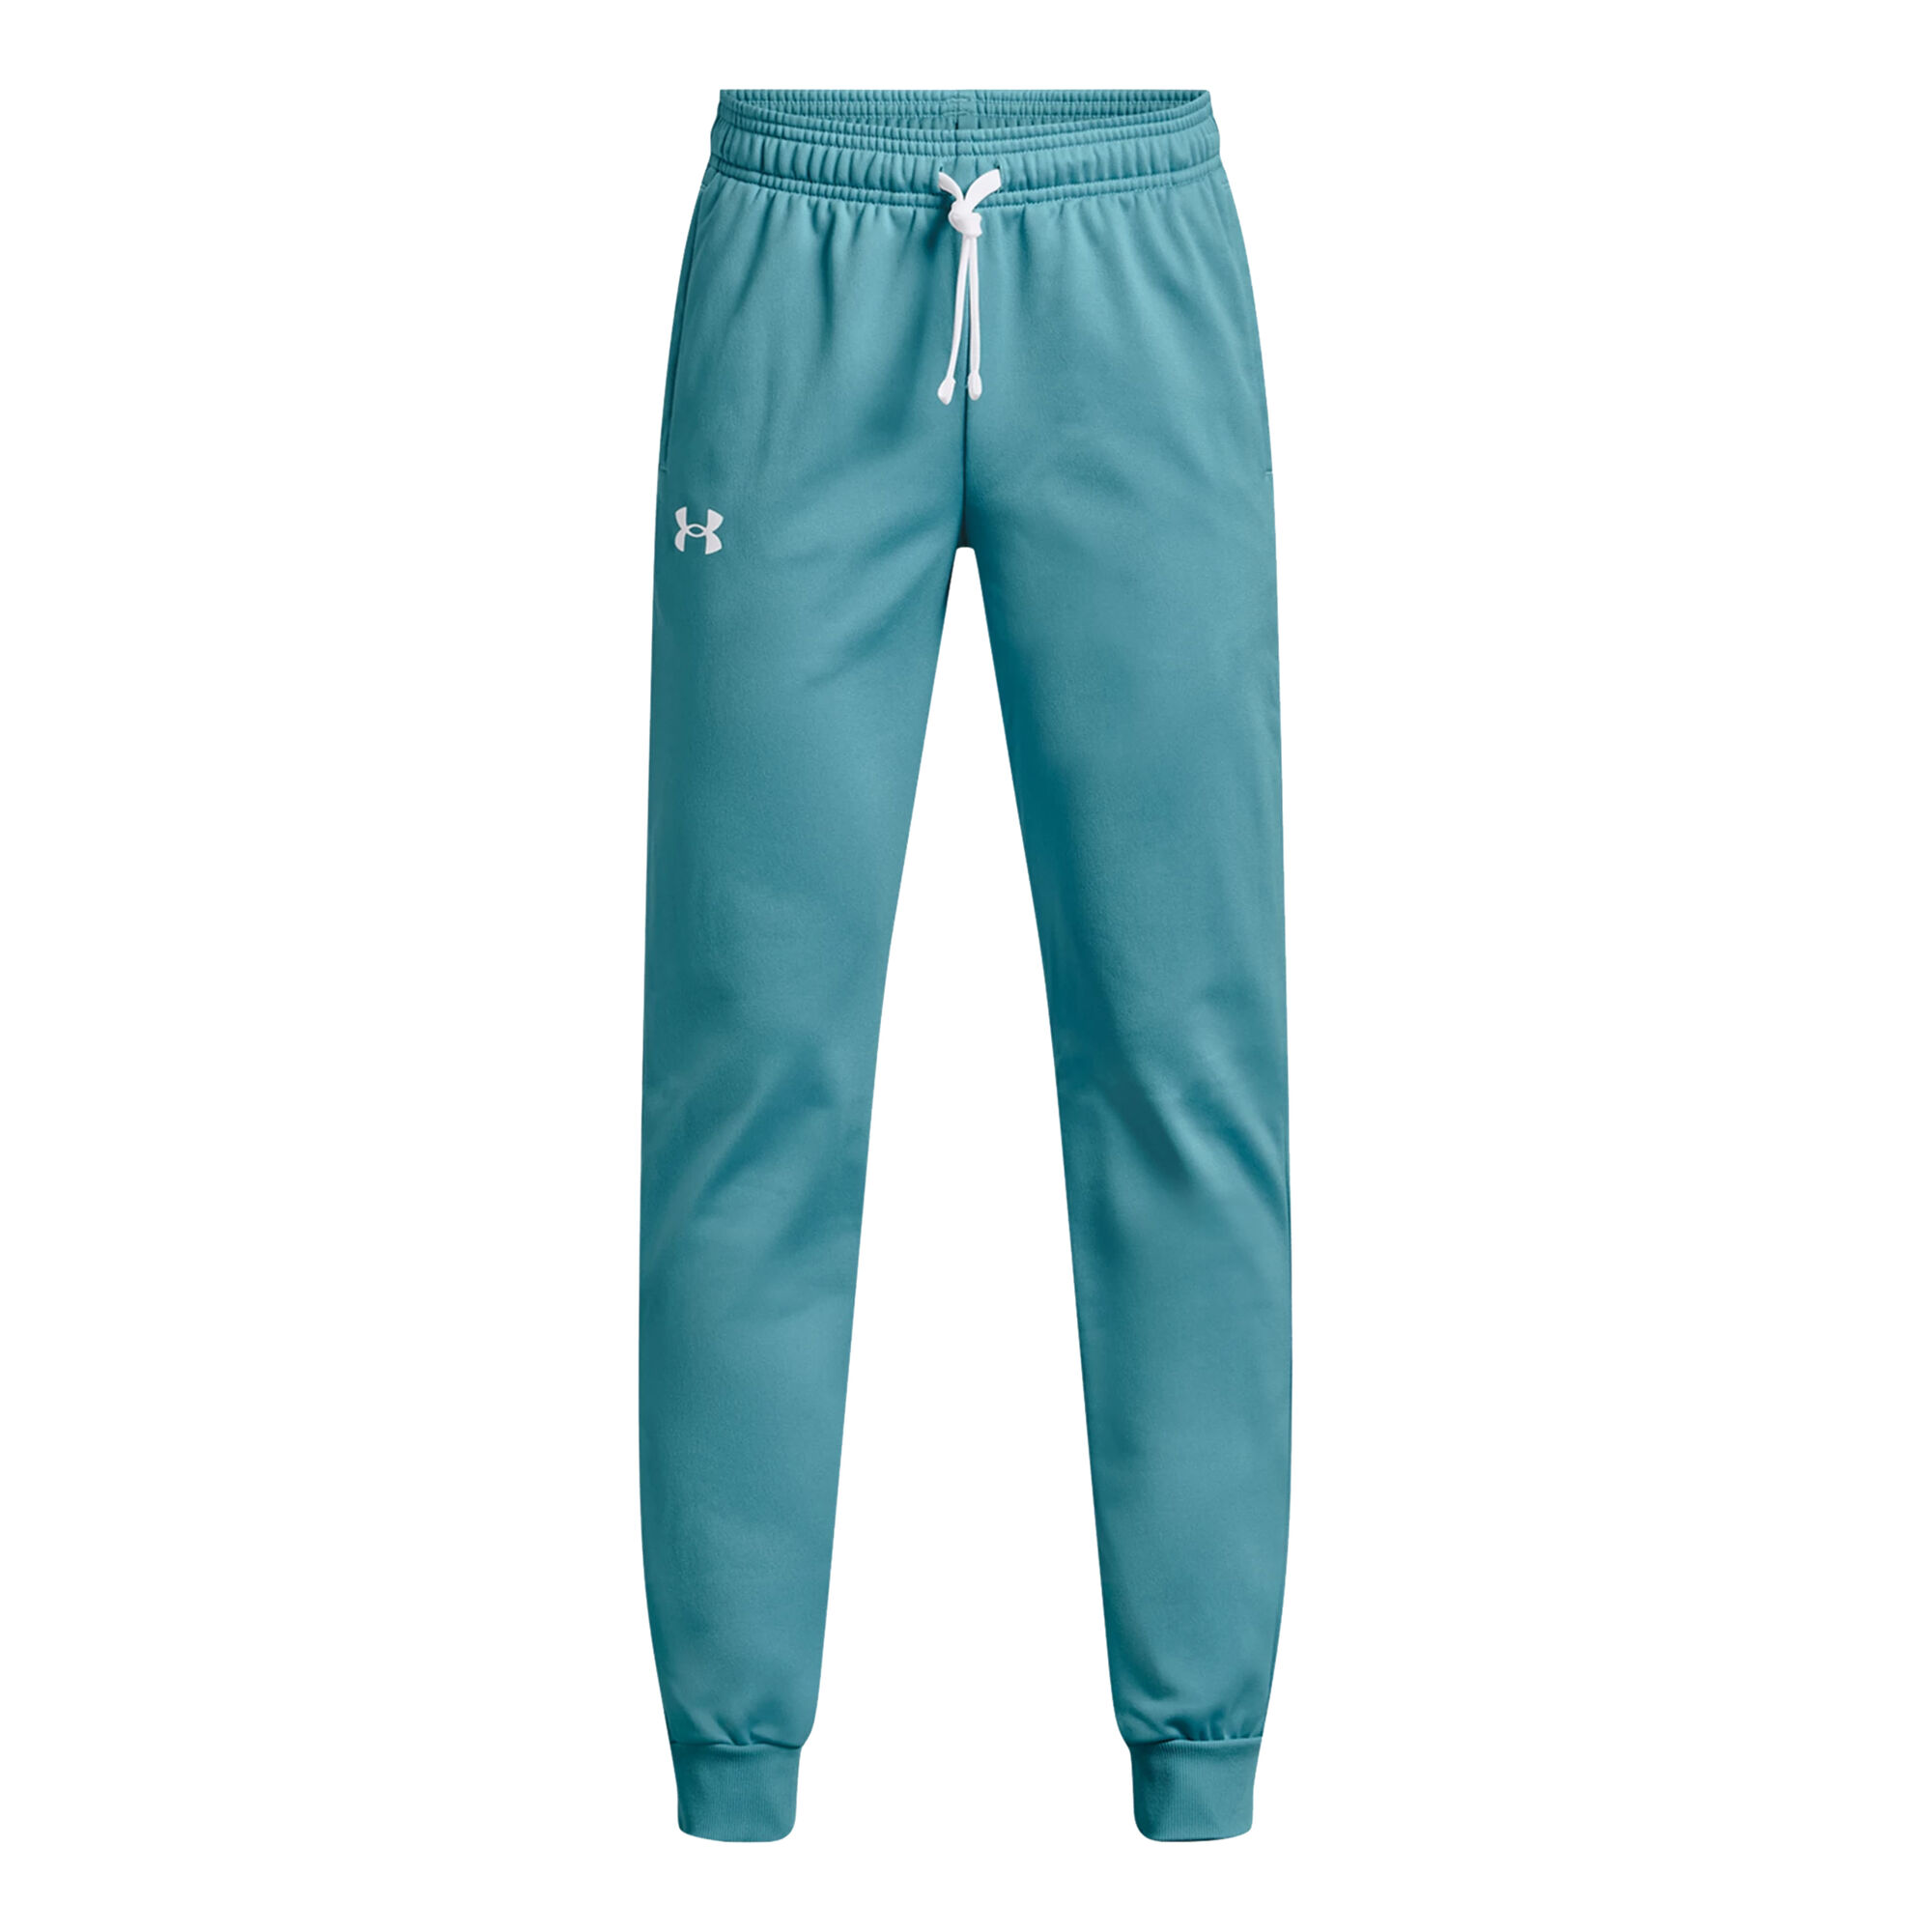 Buy Under Armour Brawler 2.0 Tapered Training Pants Boys Turquoise online